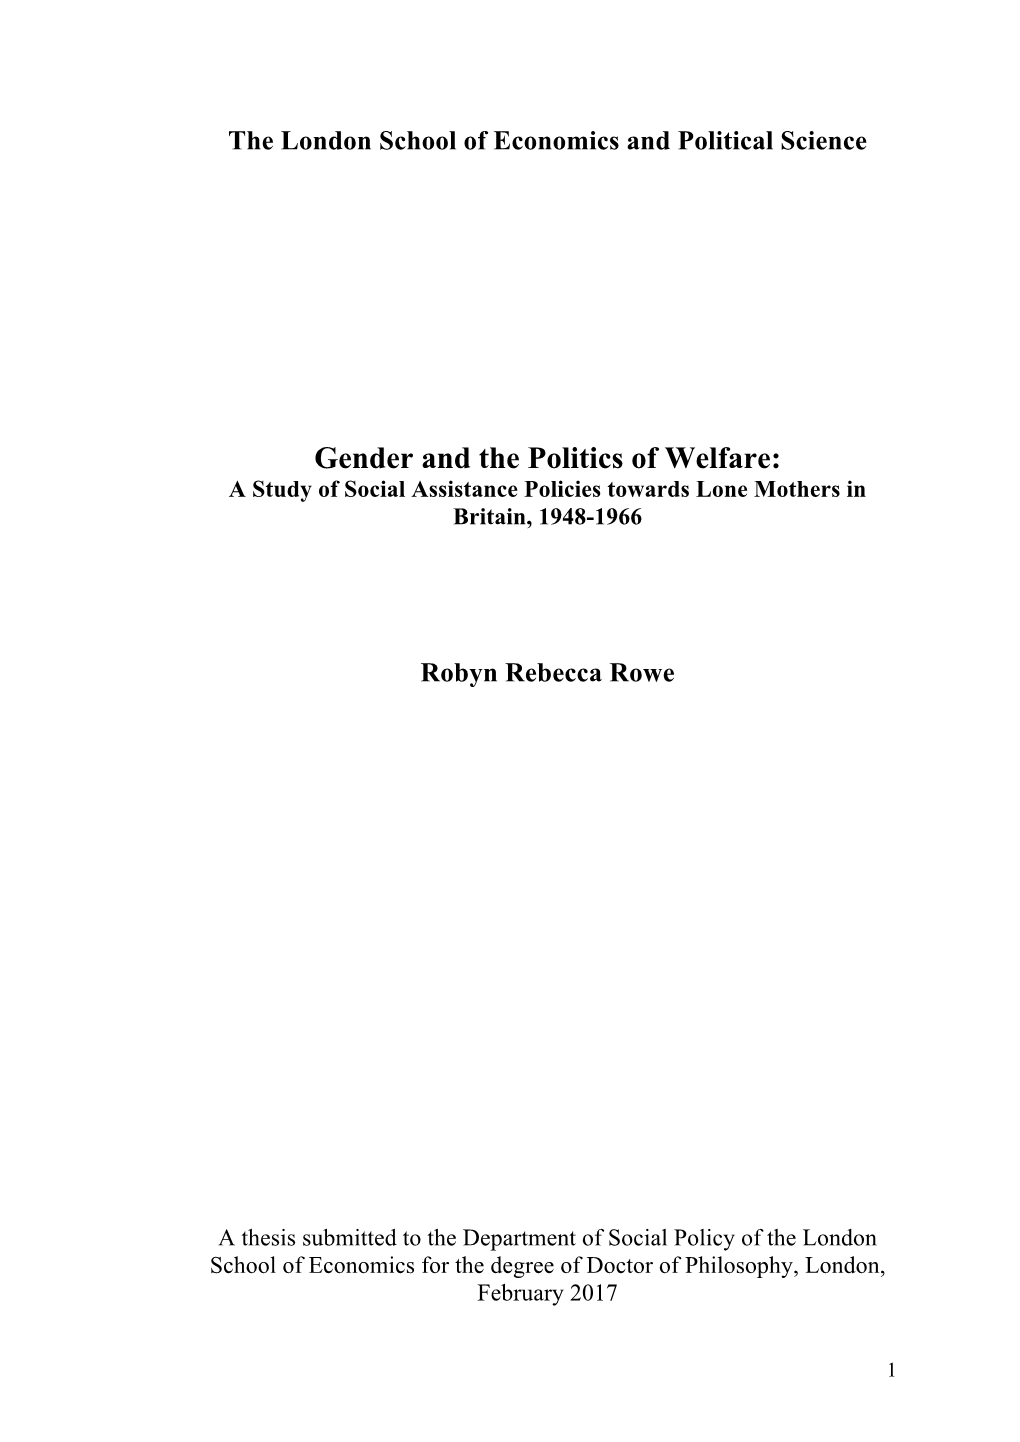 Gender and the Politics of Welfare: a Study of Social Assistance Policies Towards Lone Mothers in Britain, 1948-1966